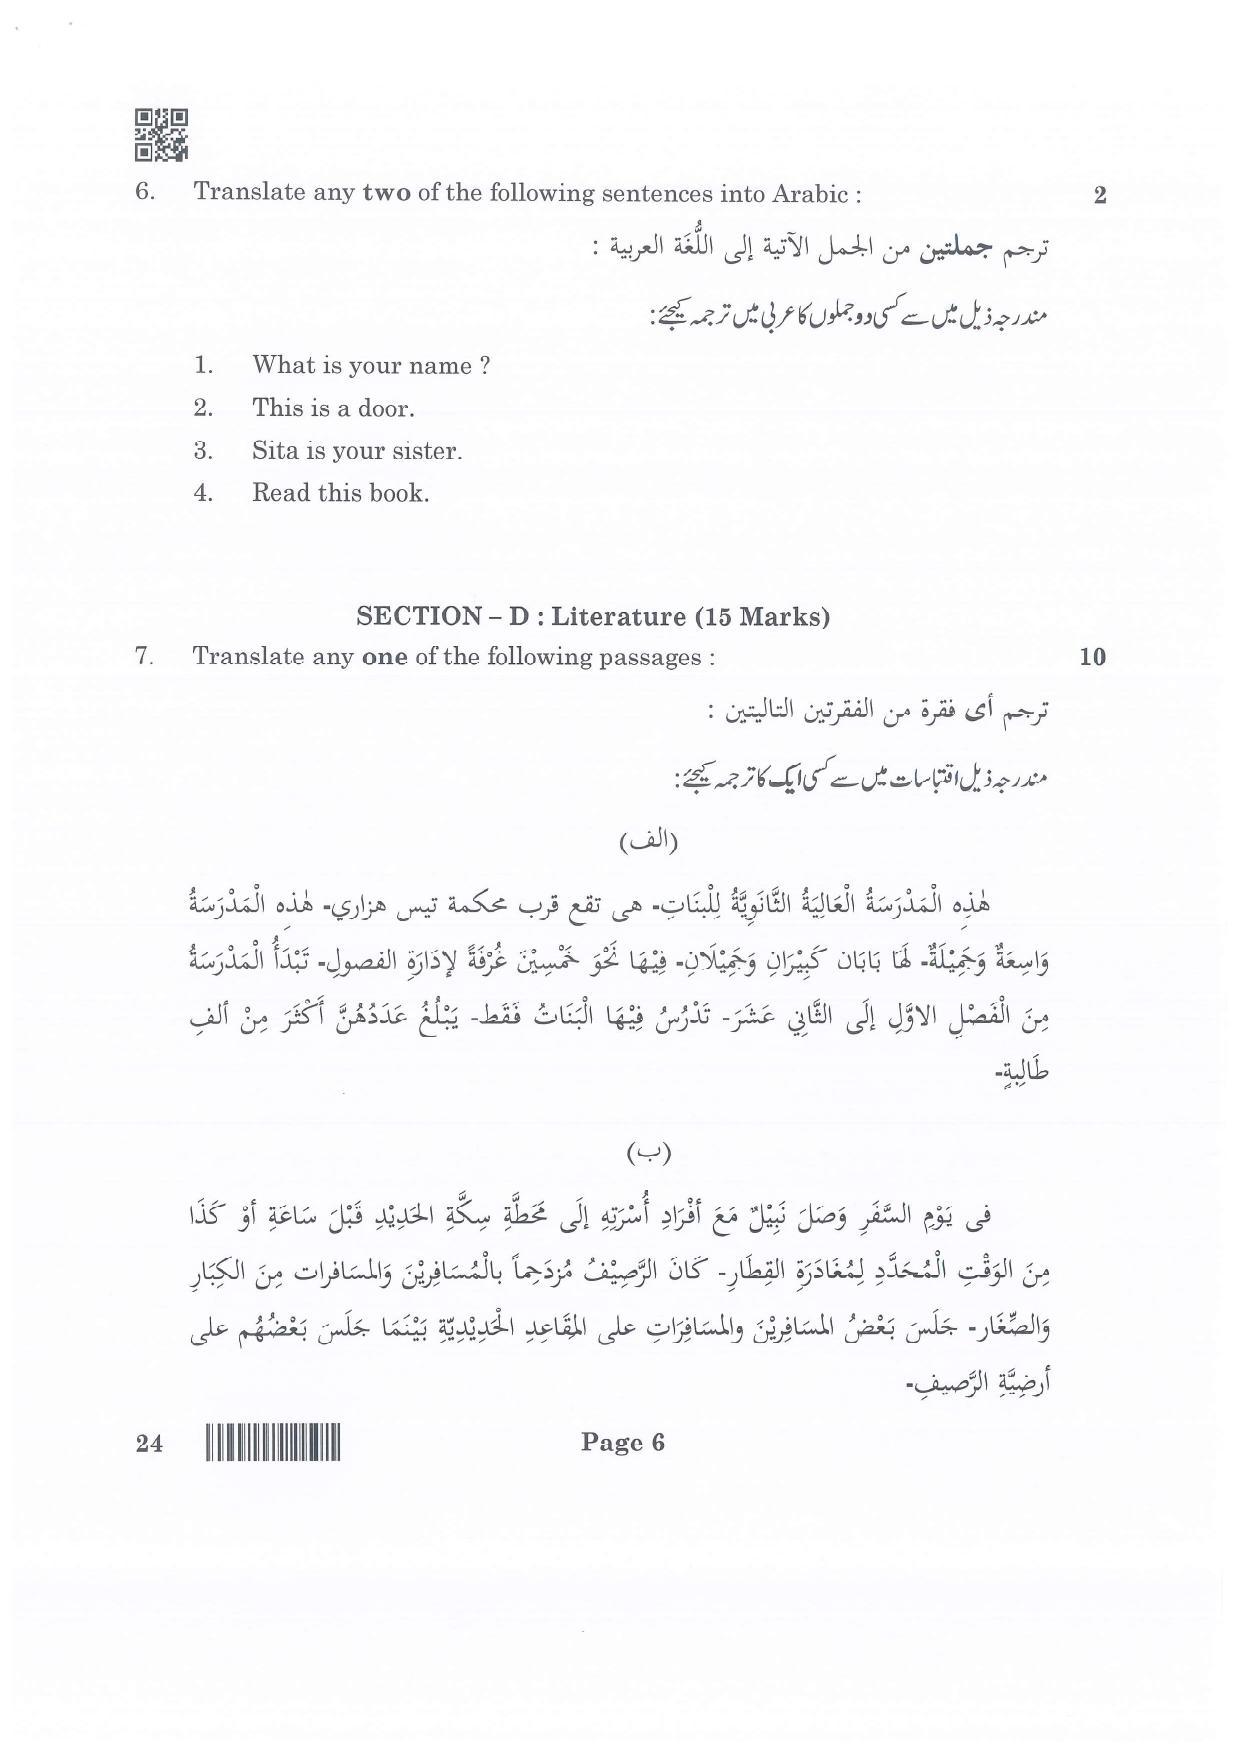 CBSE Class 10 24_Arabic 2022 Question Paper - Page 6